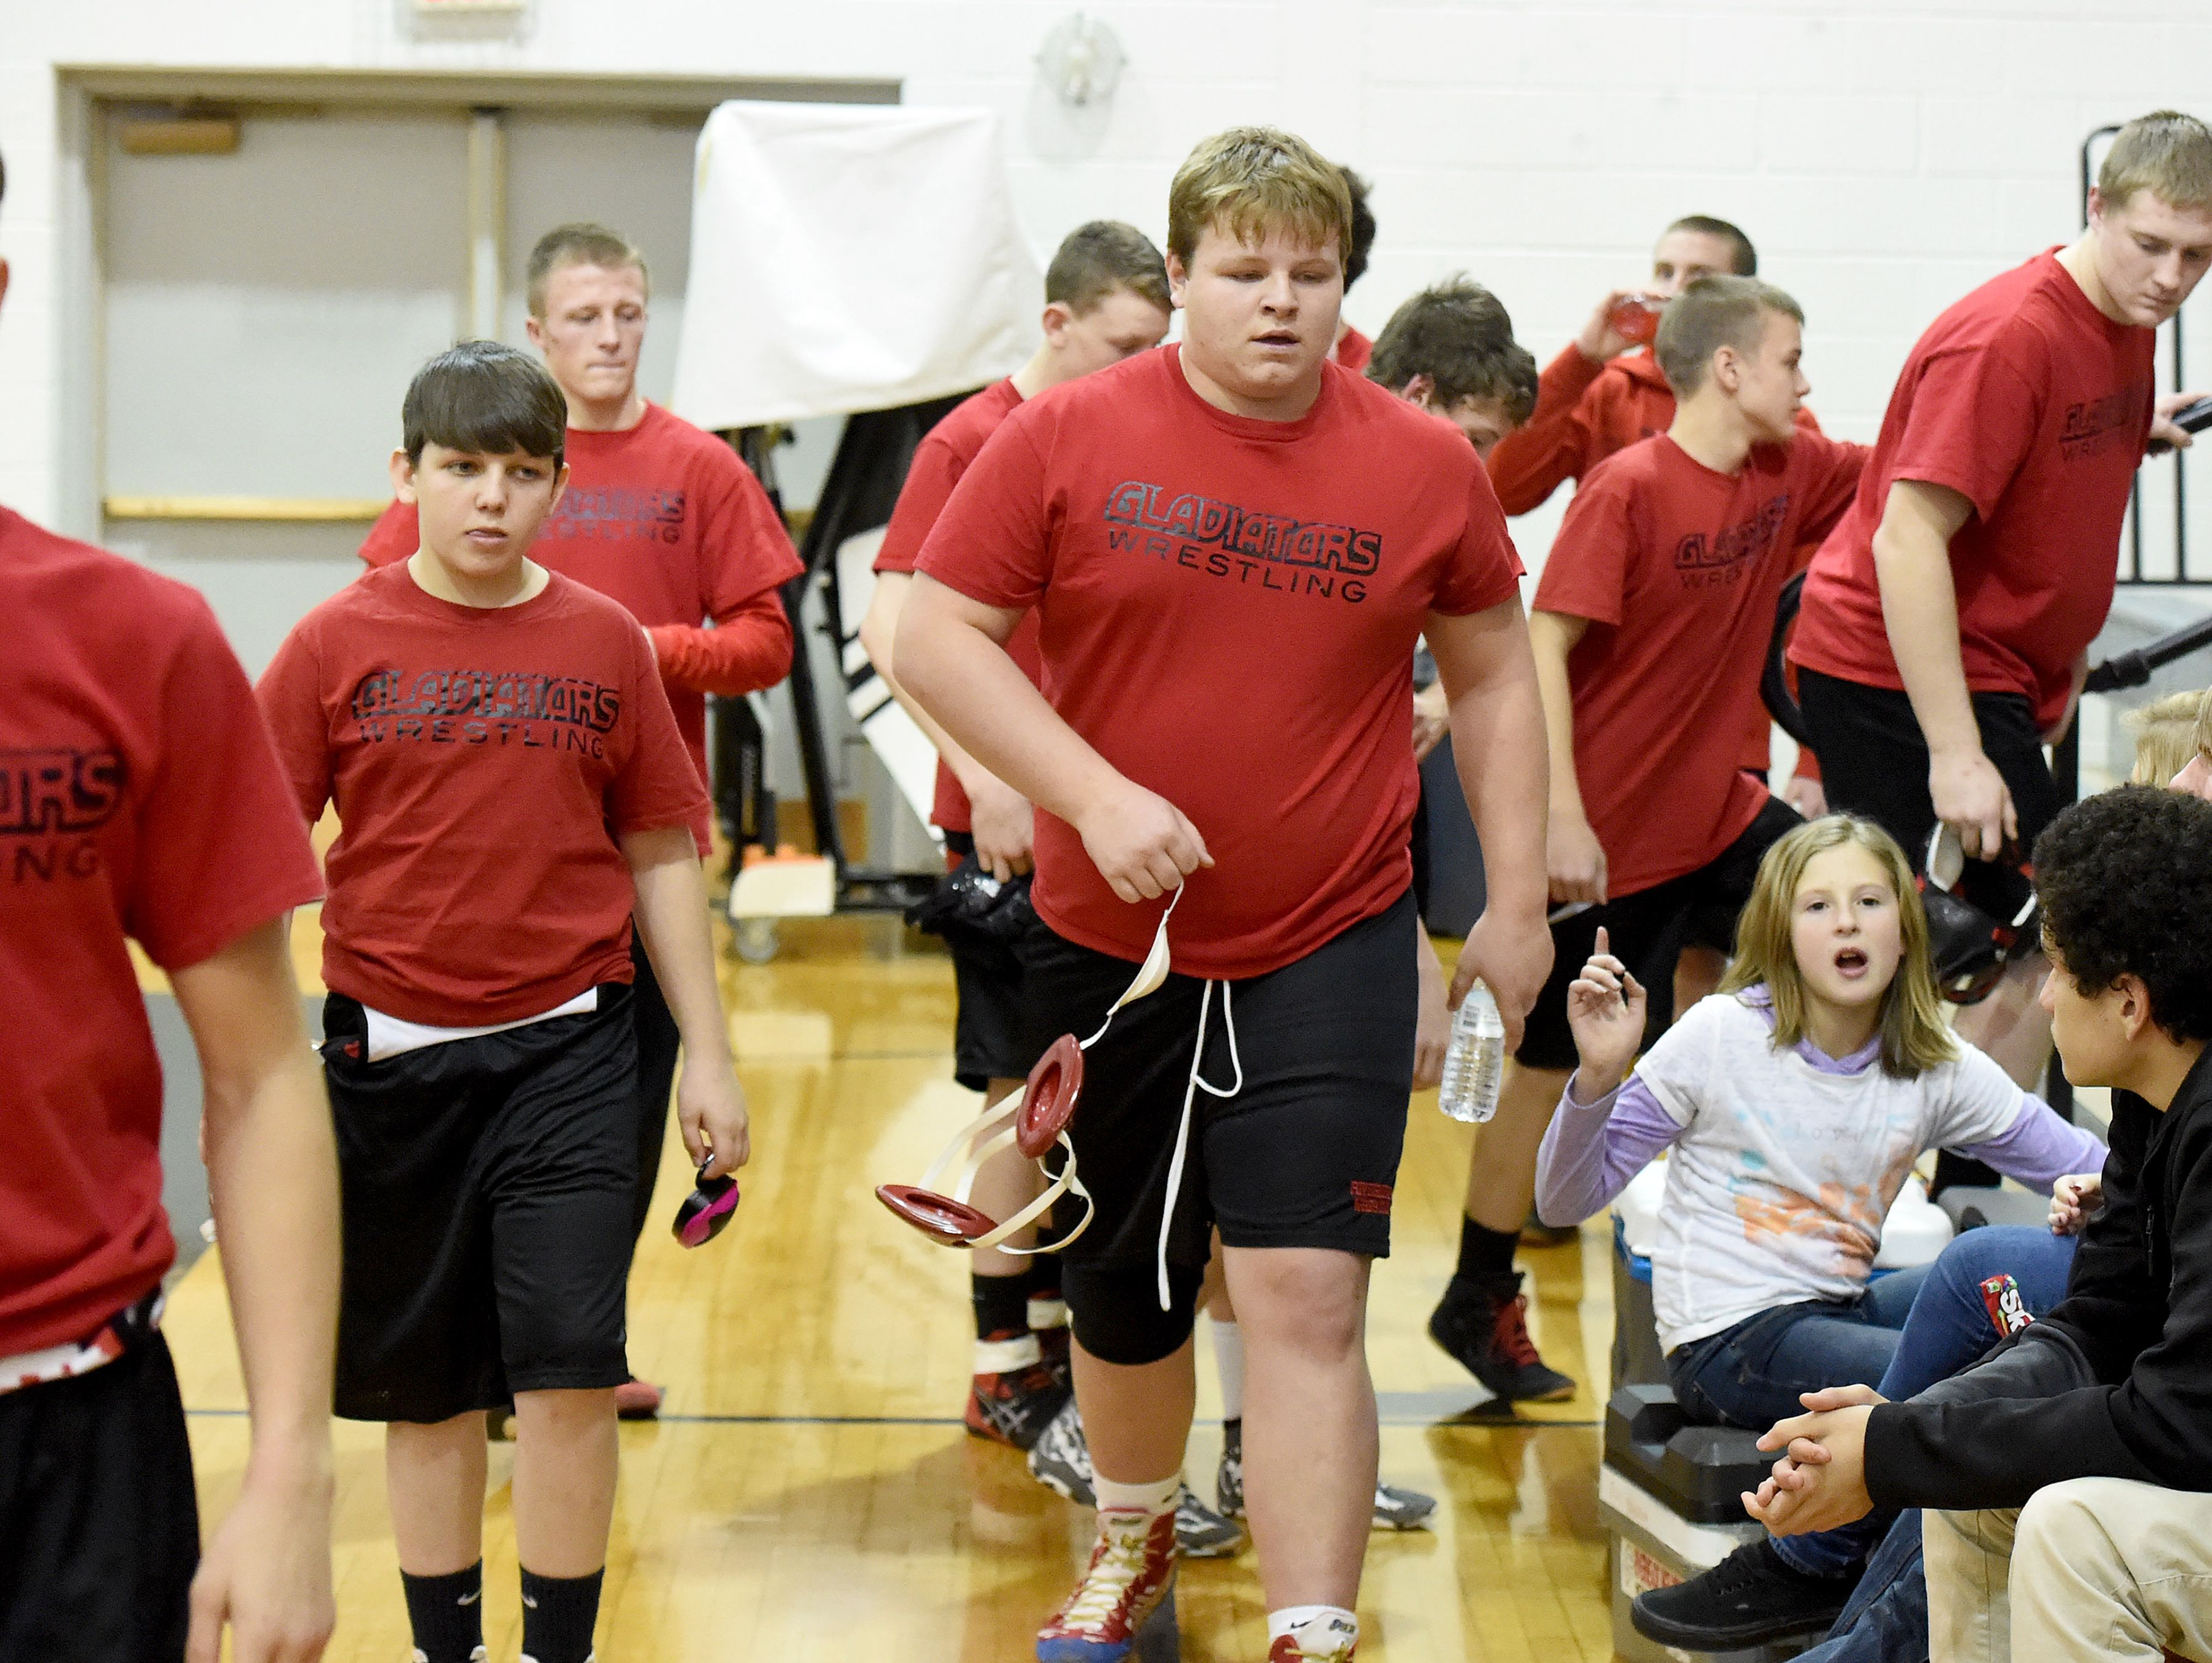 Riverheads' James Rea (center) walks with his team as the move from one mat to the other after wrestling against Buffalo Gap and preparing to take on Stuarts Draft during the Bison Wrestling Quad in Swoope on Wednesday, Jan. 6, 2016. Rea won the match with a pin.